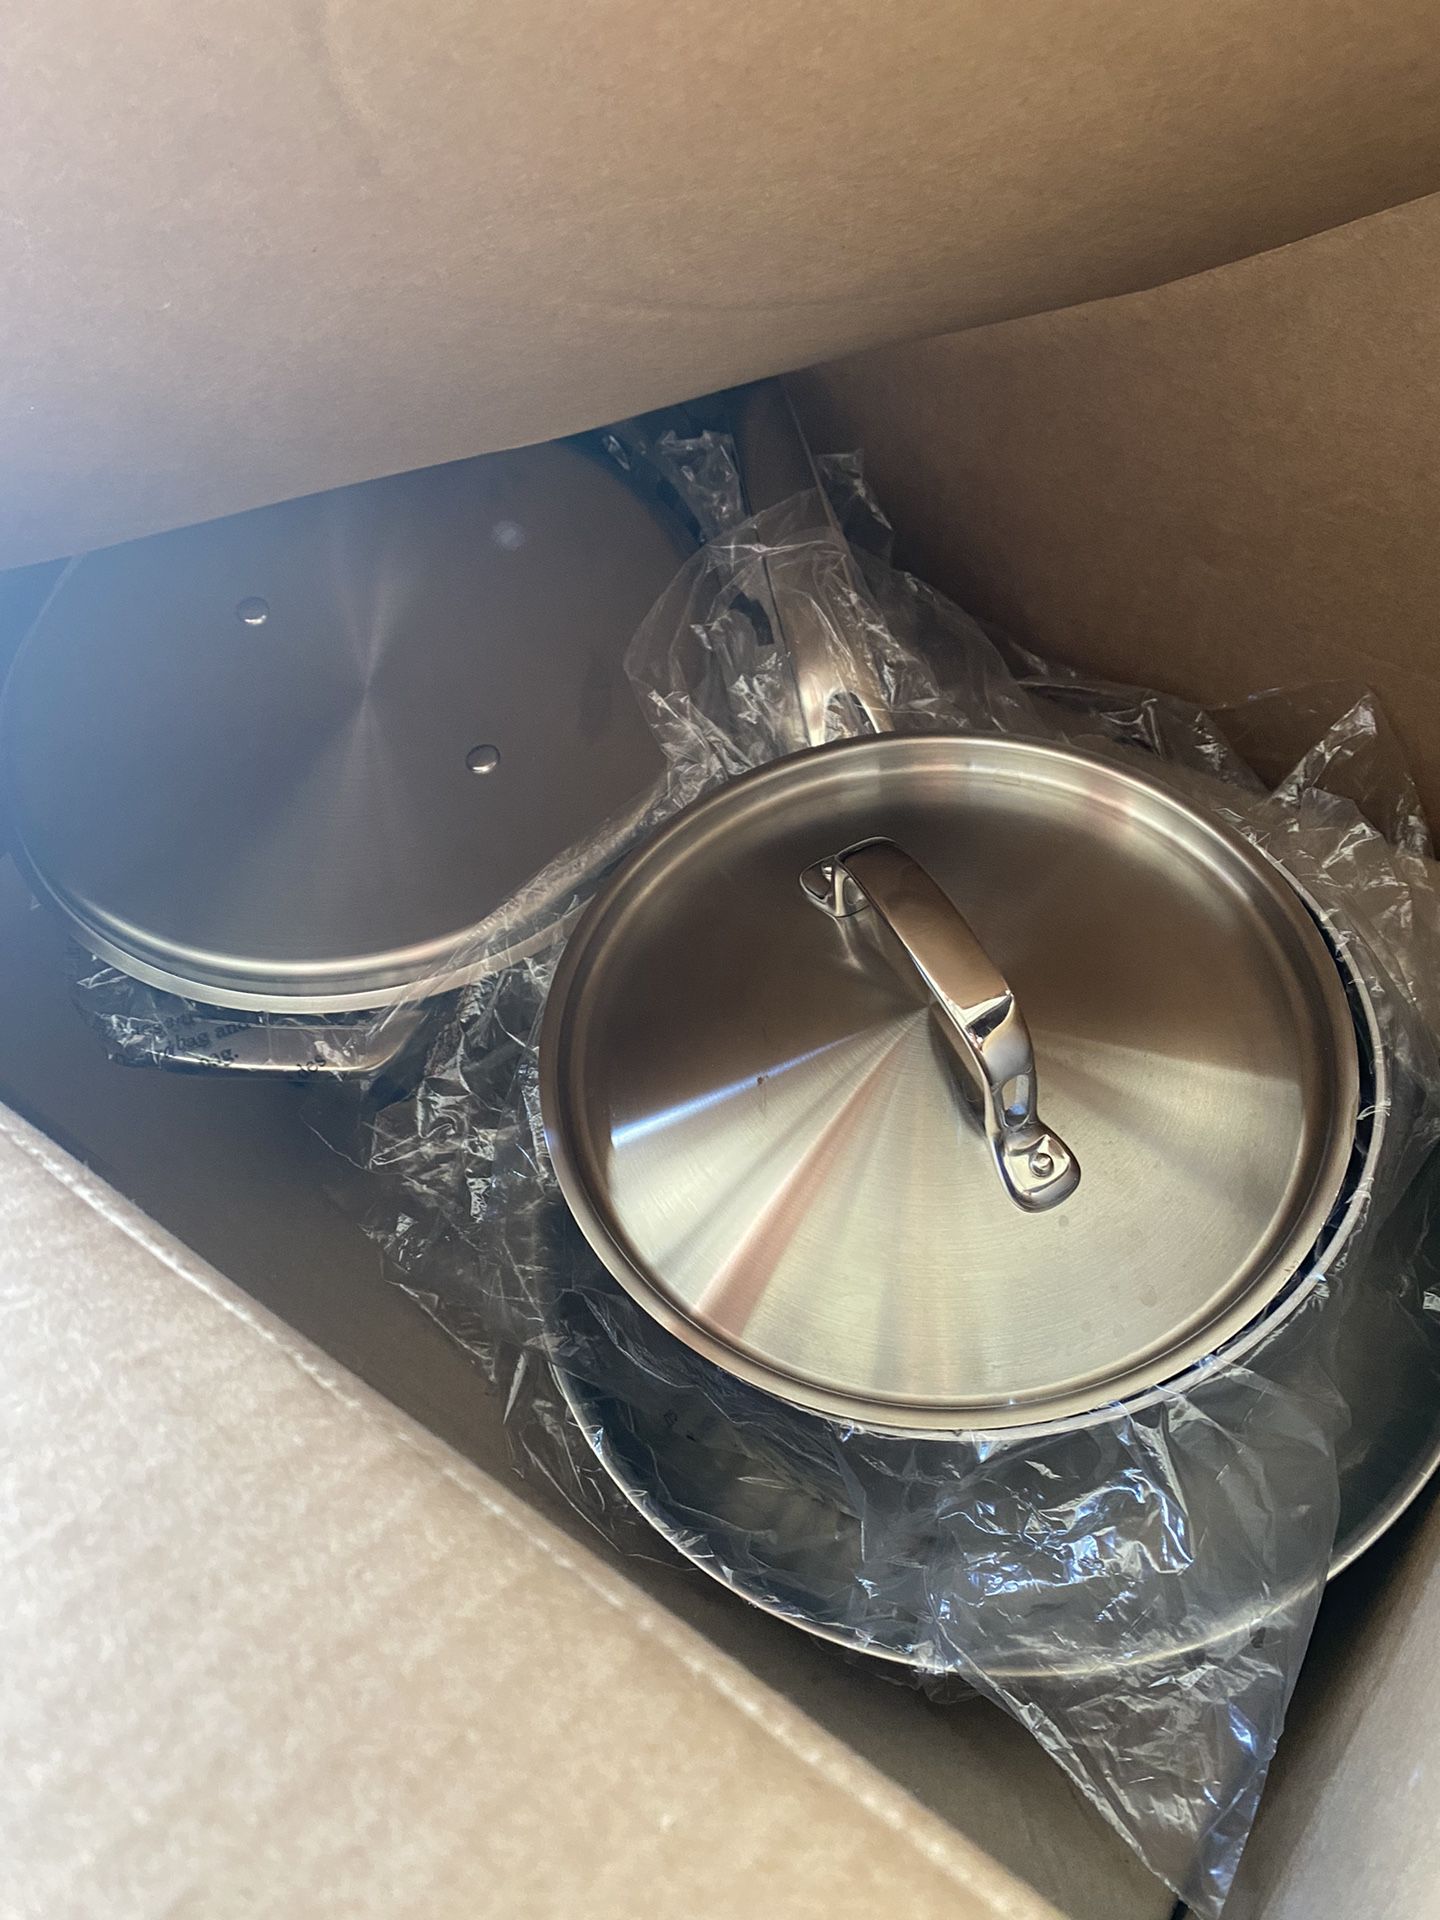 Tramontina 12-piece Tri-Ply Clad Stainless Steel Cookware Set (RETAIL STORE  COSTCO & WALMART $210-$253) BIG SAVING DEAL! ️️️ used like new for Sale in  Bell Gardens, CA - OfferUp